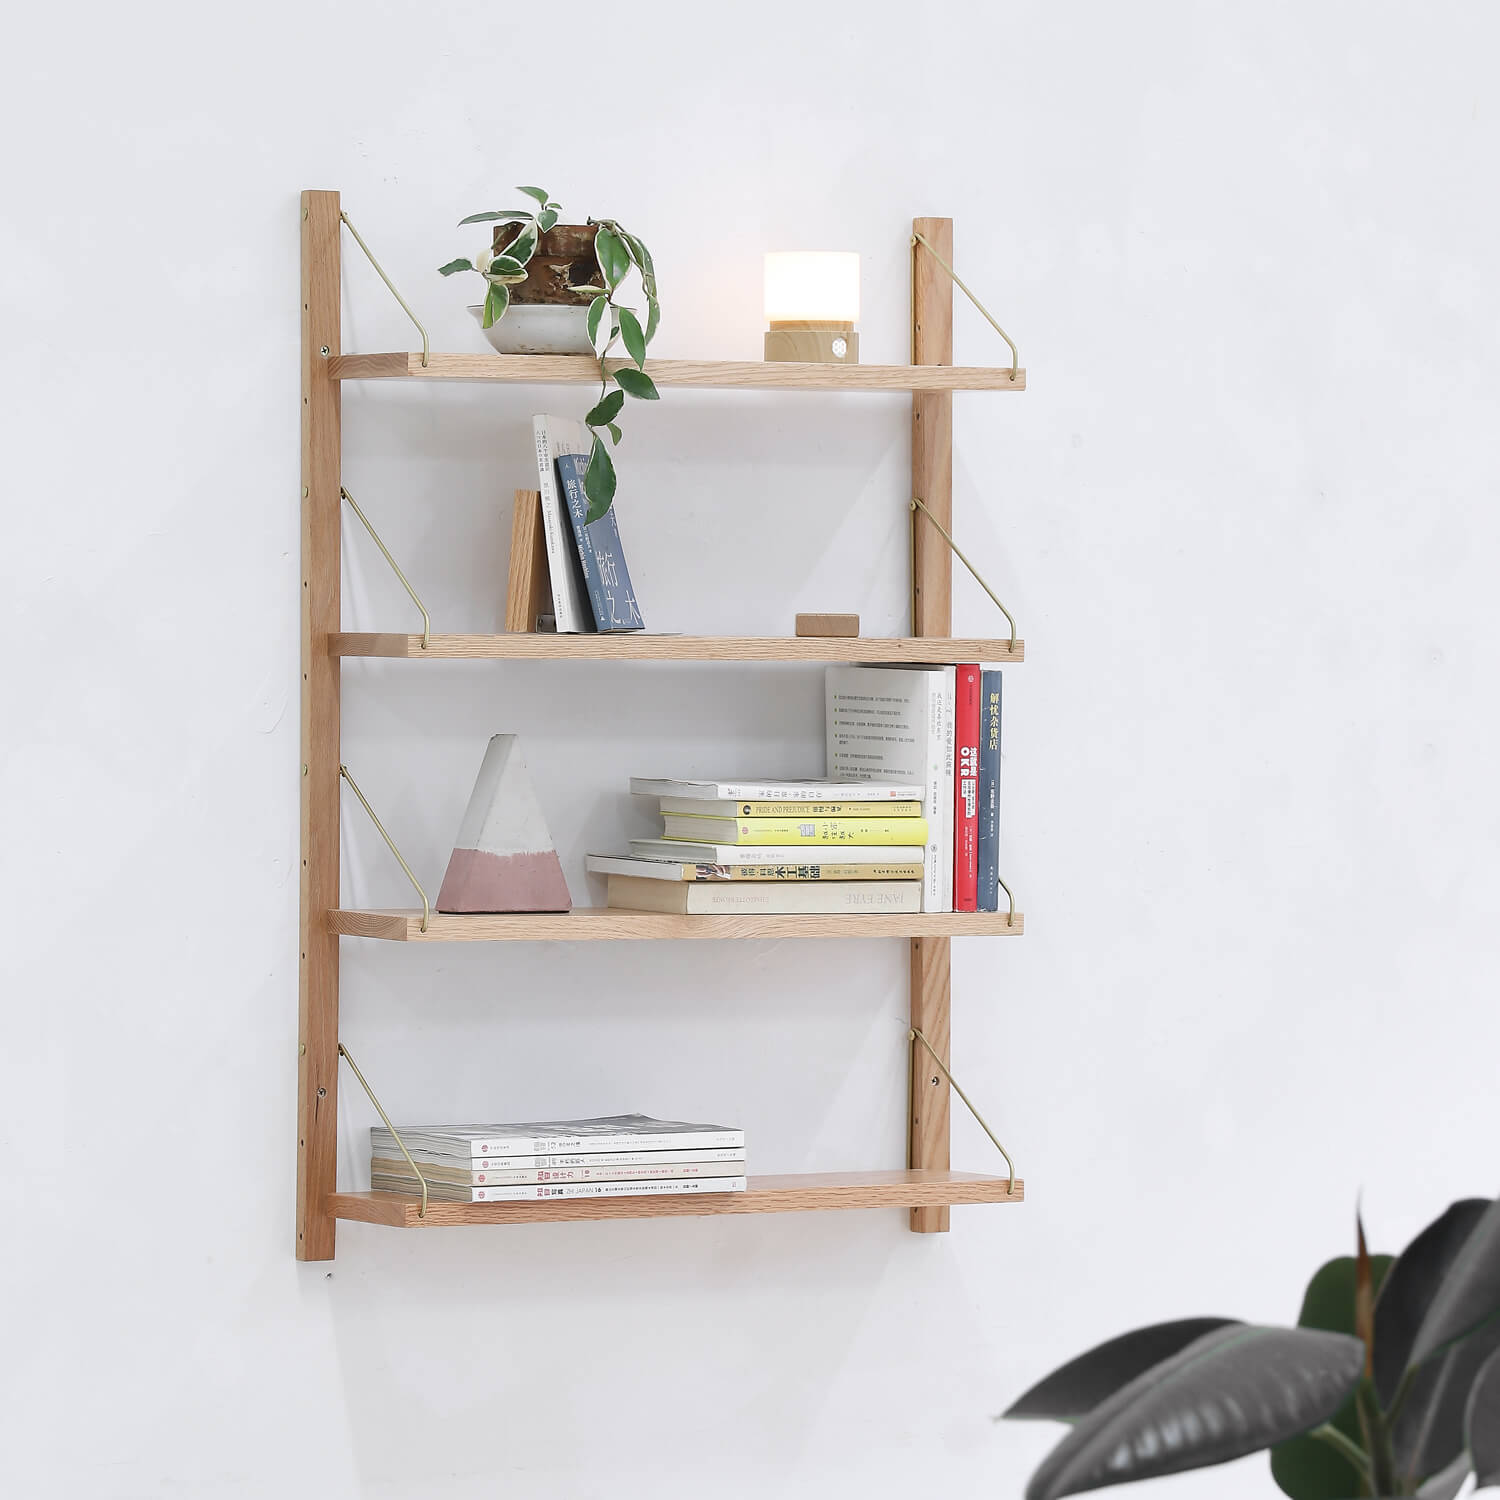 Close-up of Multi-Tier Wall Flexible Display Shelf Unit Rack with books and decor